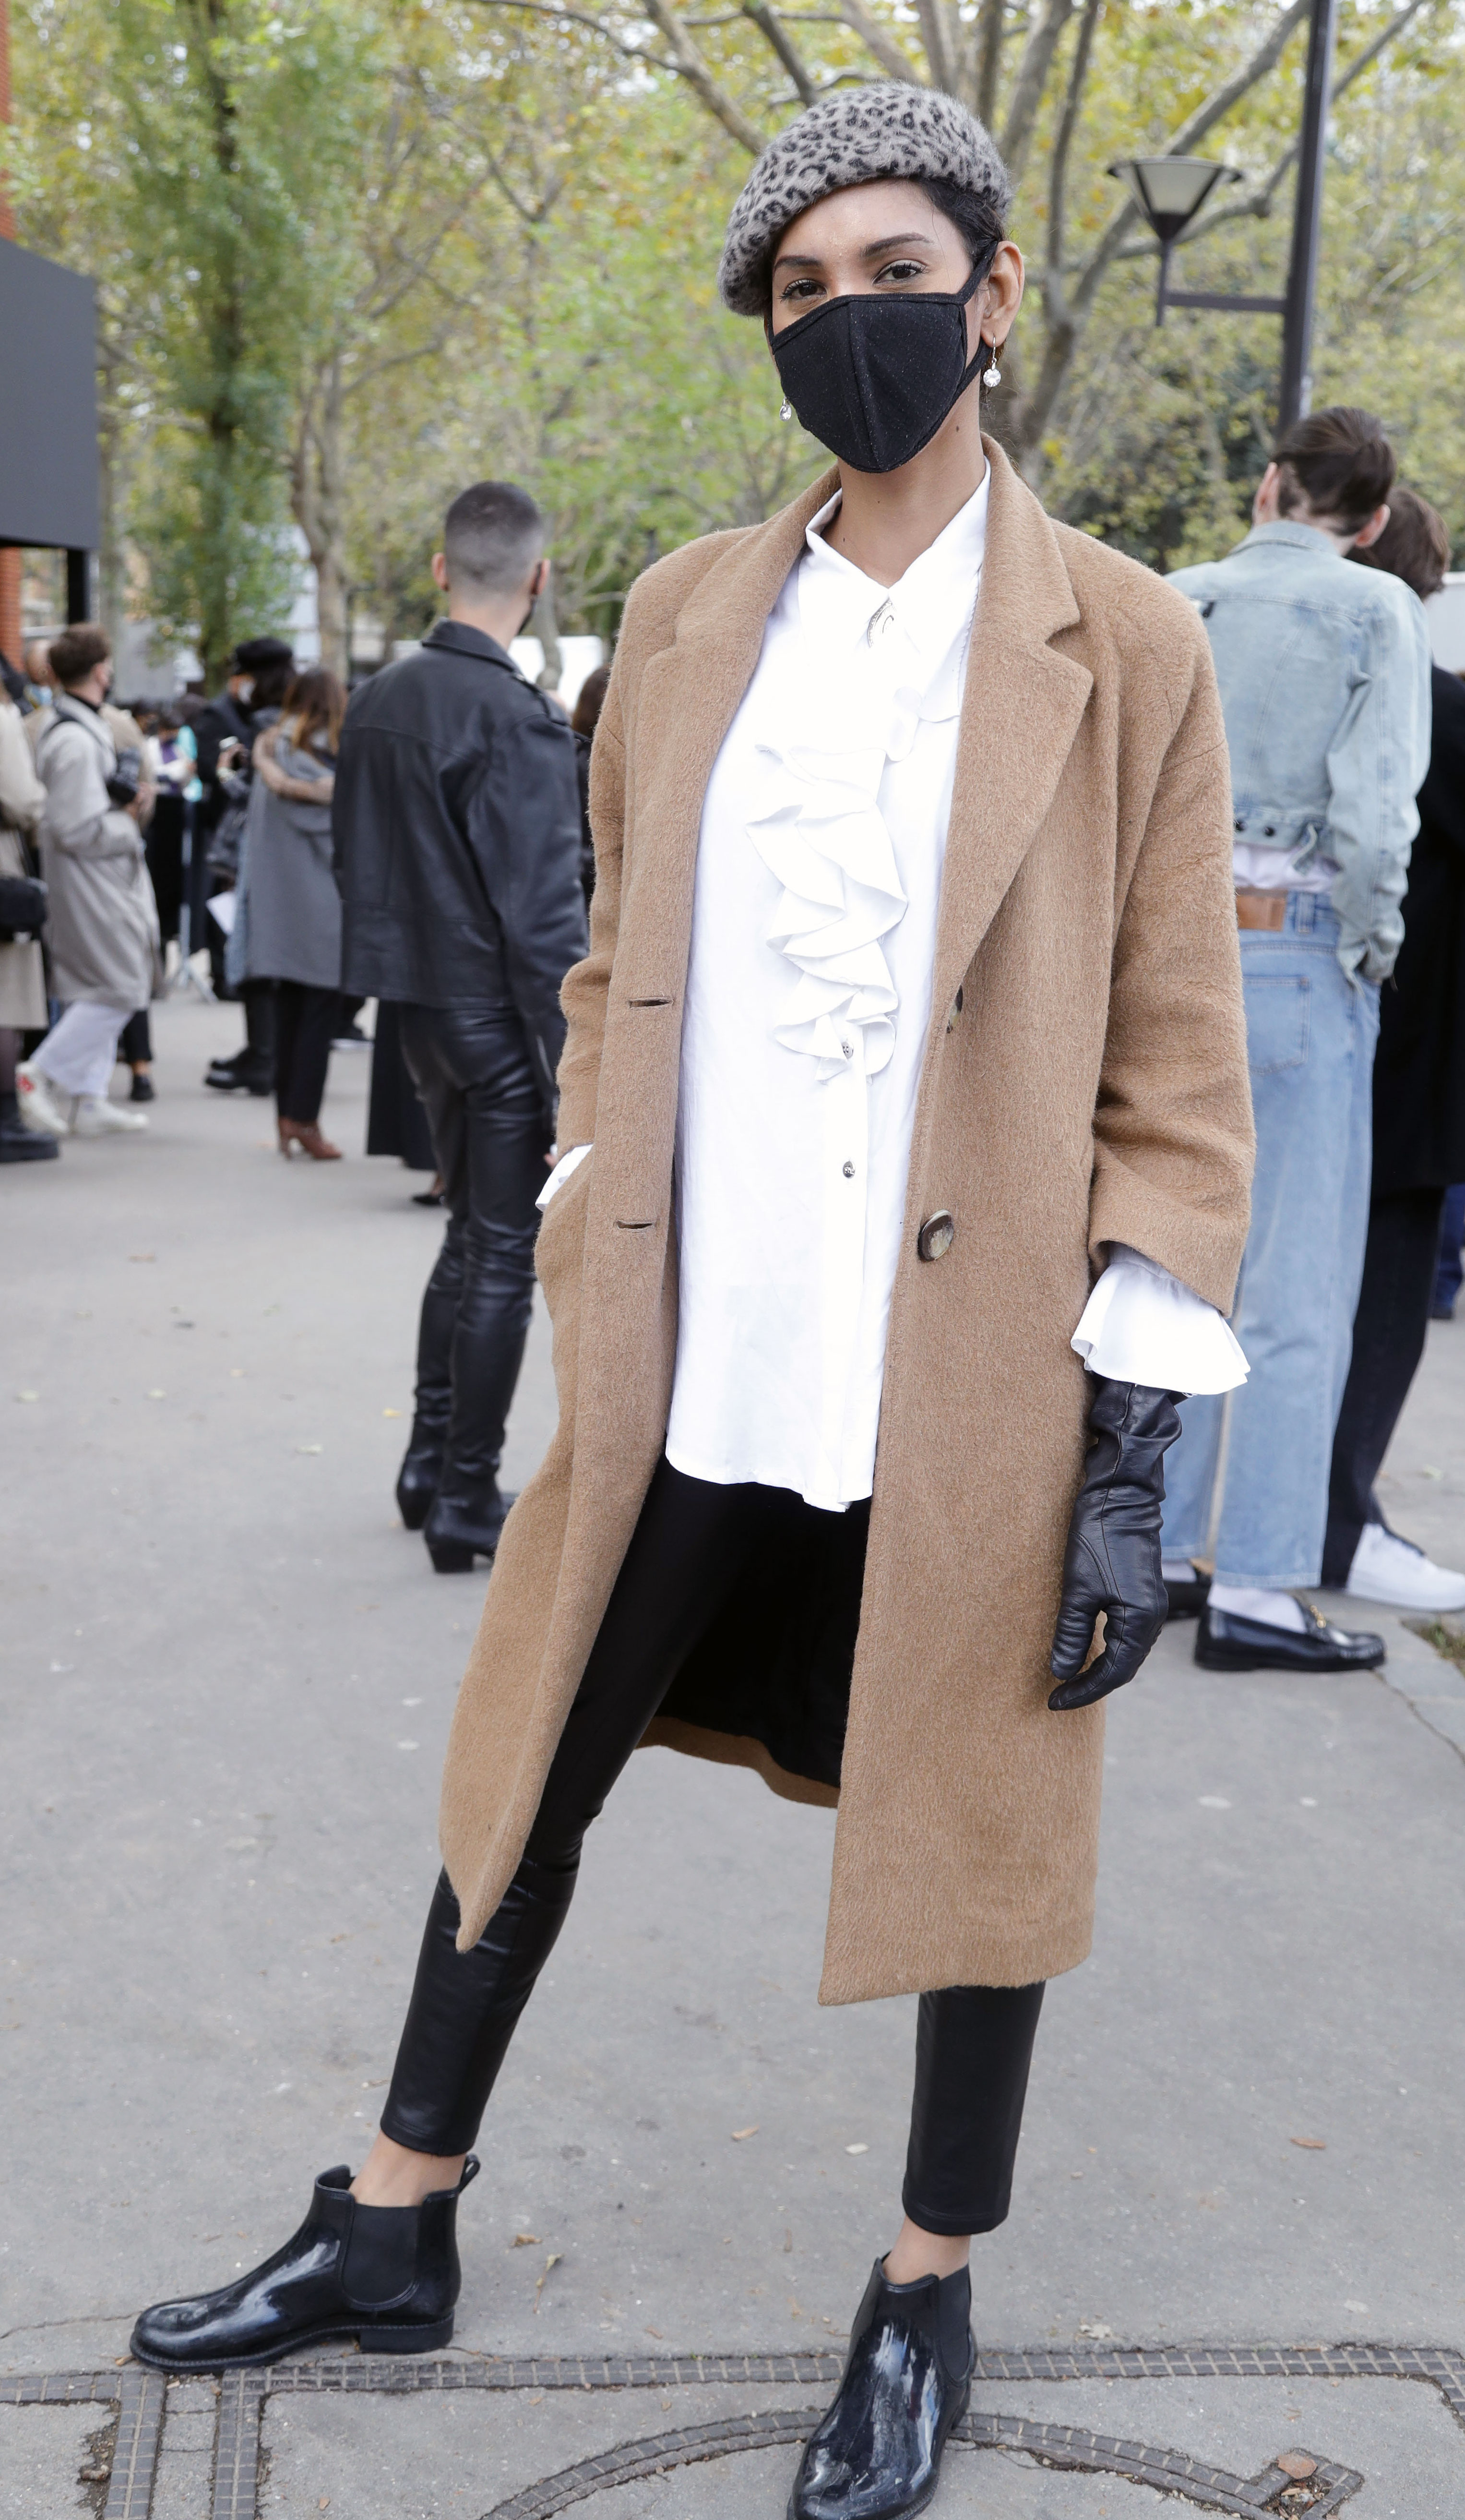 Paris Fashion Week Street Style: woman in a beret, face mask, a beige coat, and black accessories.